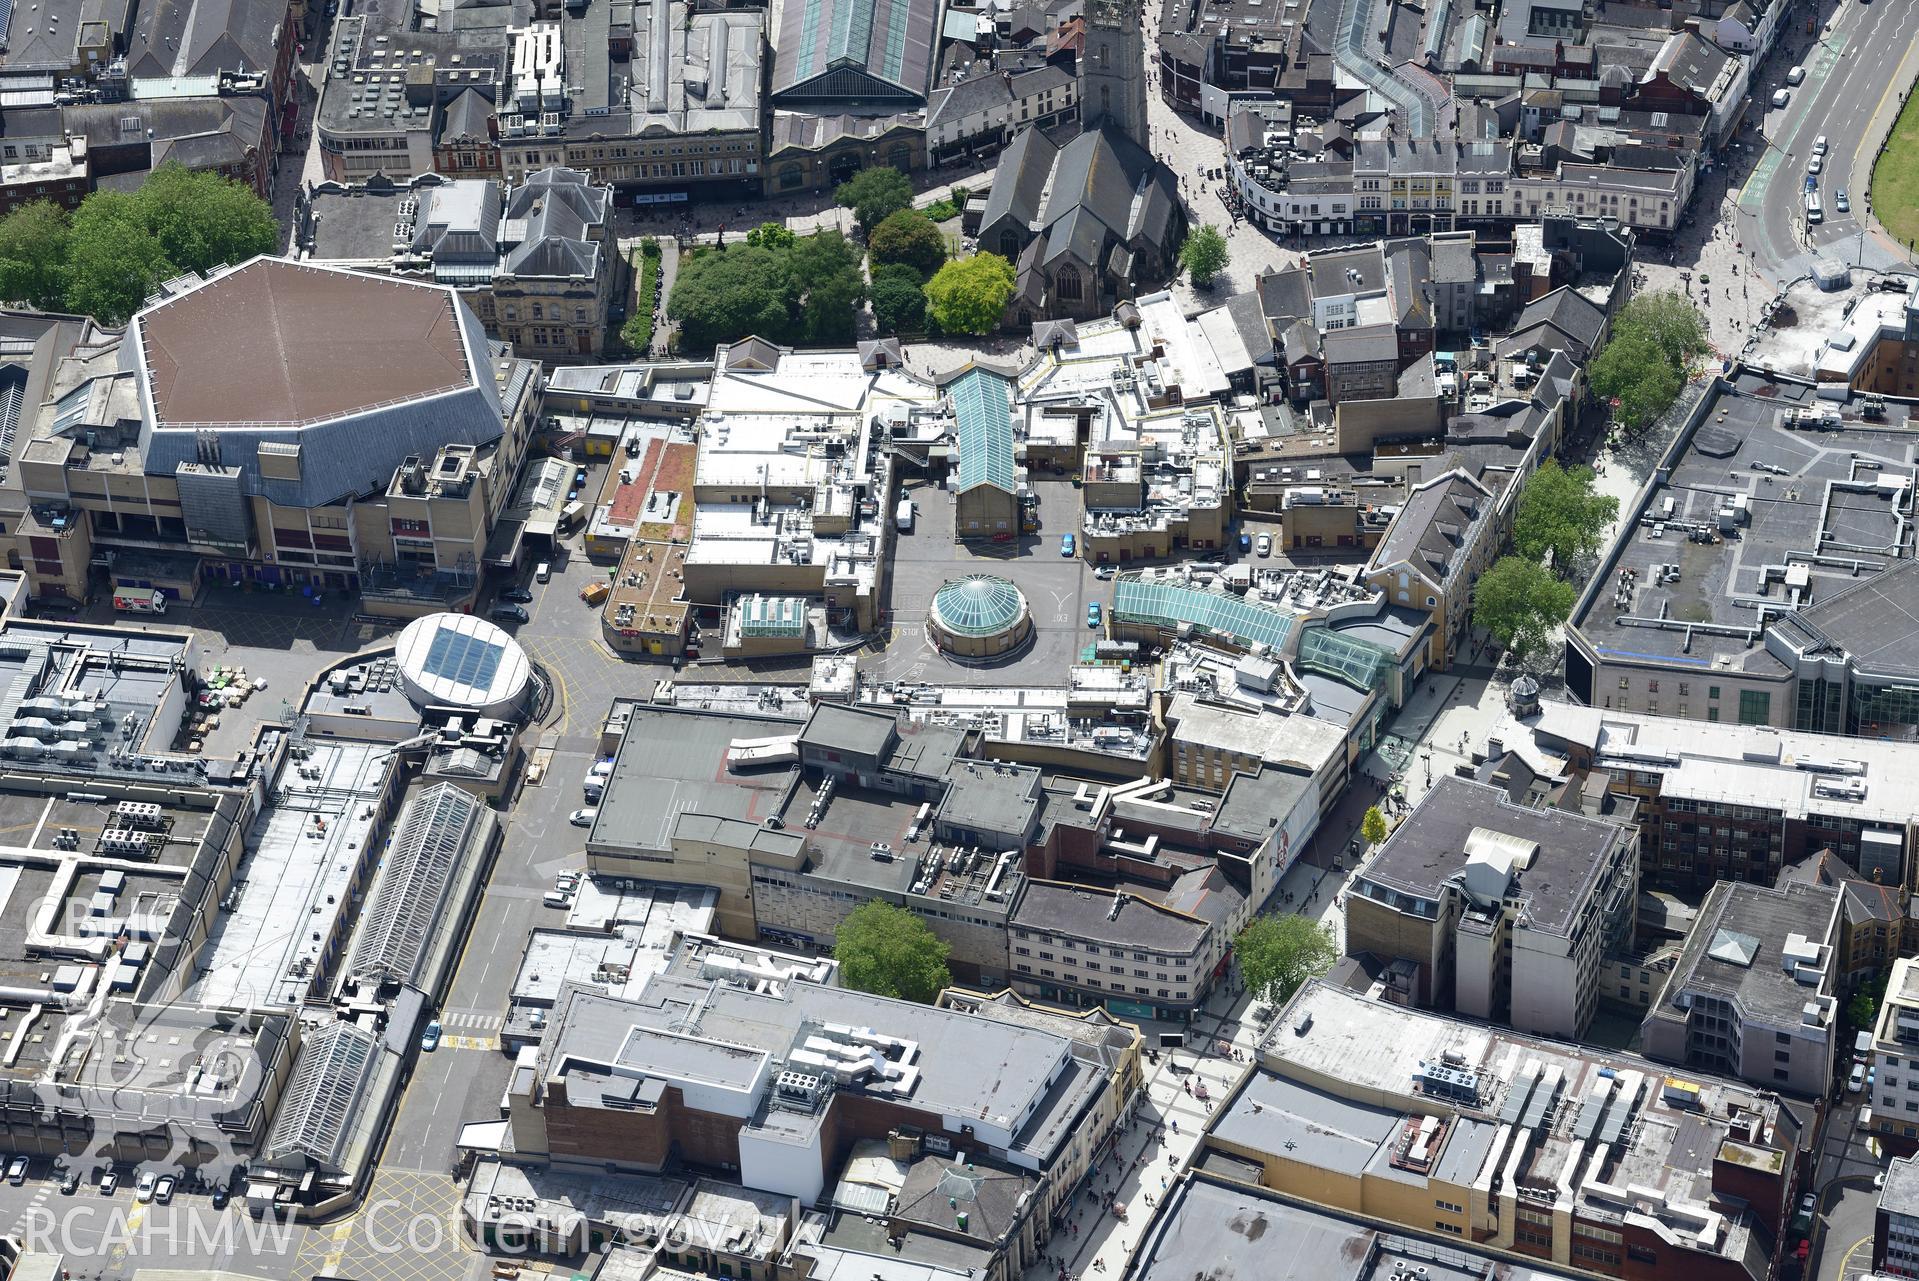 Cardiff Central Library; St. John the Baptist's Church and St. David's shopping centre, Cardiff. Oblique aerial photograph taken during the Royal Commission's programme of archaeological aerial reconnaissance by Toby Driver on 29th June 2015.